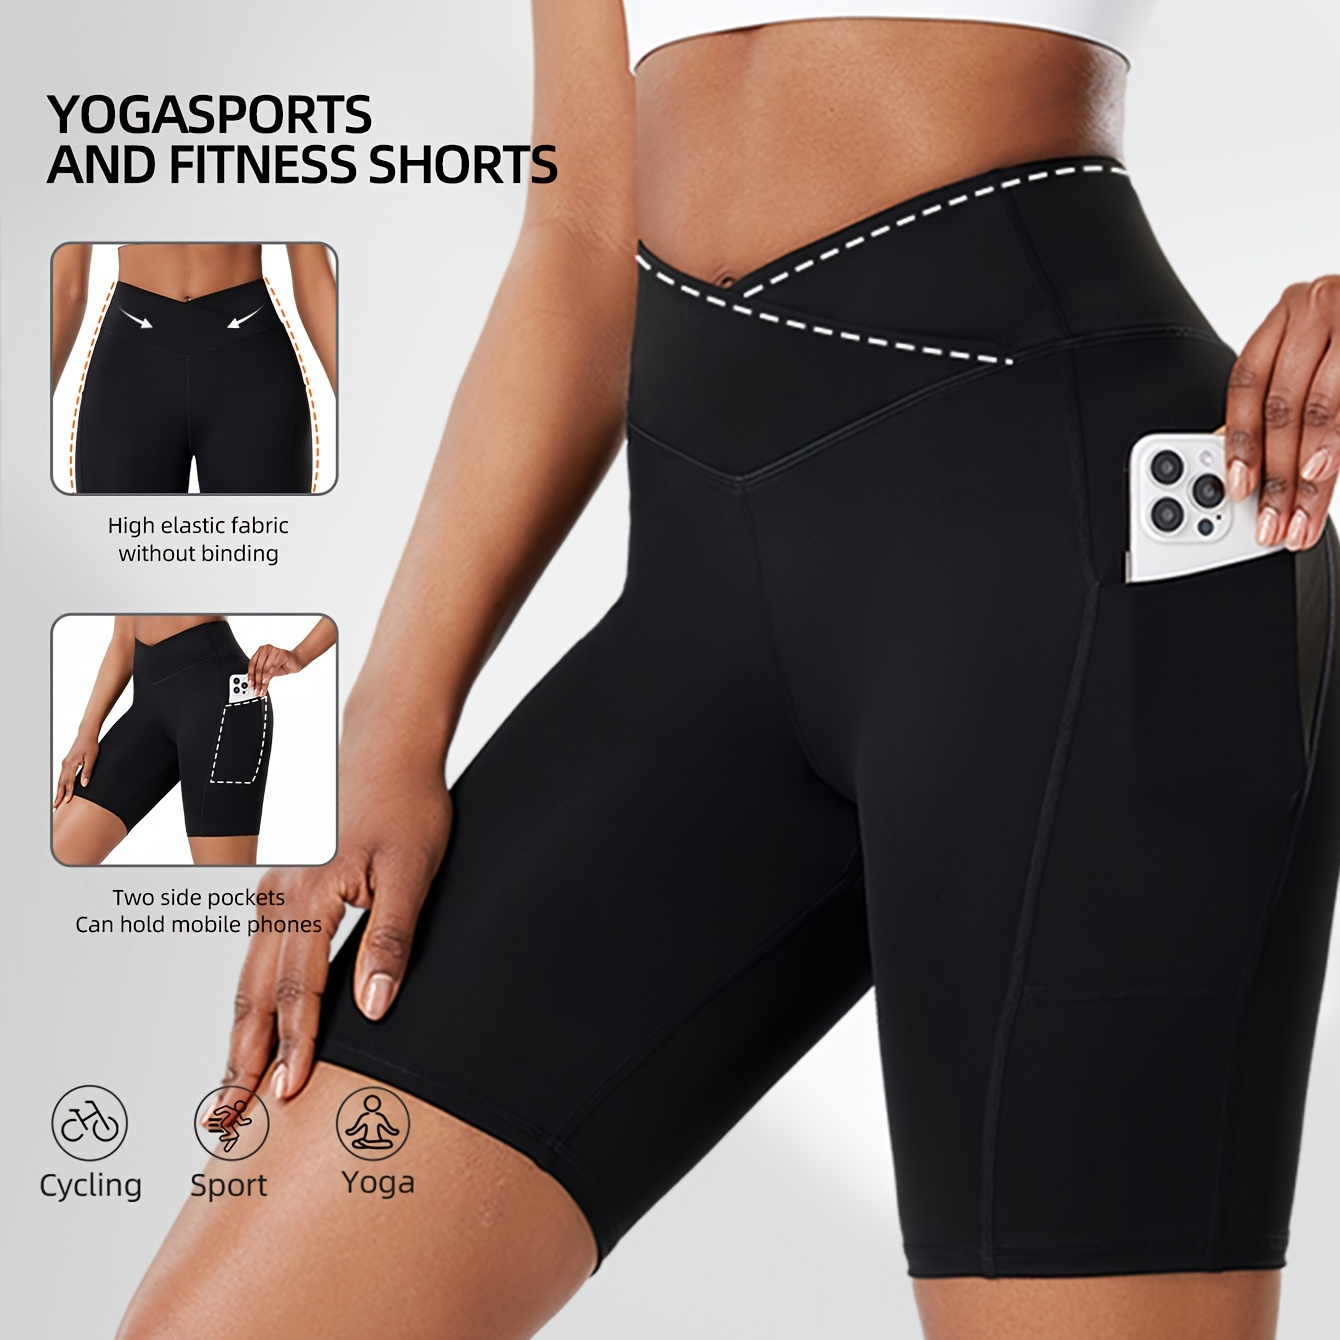 

High-waisted Tummy Control Sports Shorts, Women's Tight Cycling With Side Pockets, Quick-dry Stretch Running Pilates Fitness Pants, V-cross Waist, 5-inch Yoga Shorts, Athletic Style